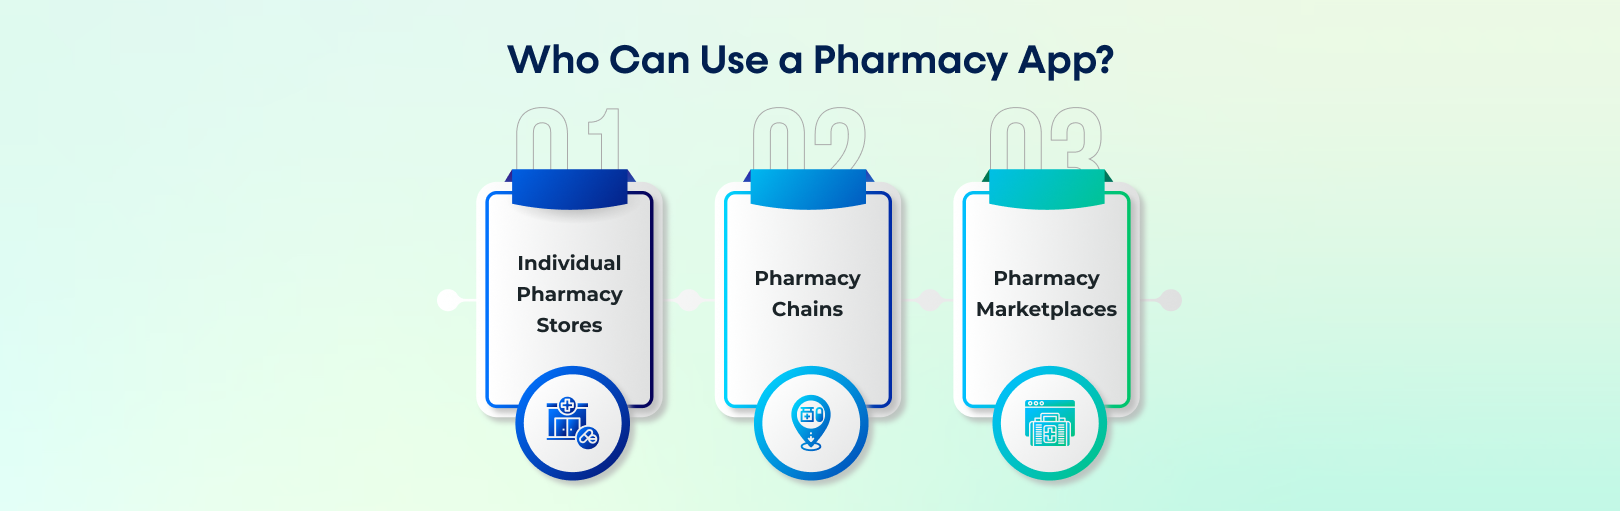 Who Can Use a Pharmacy App